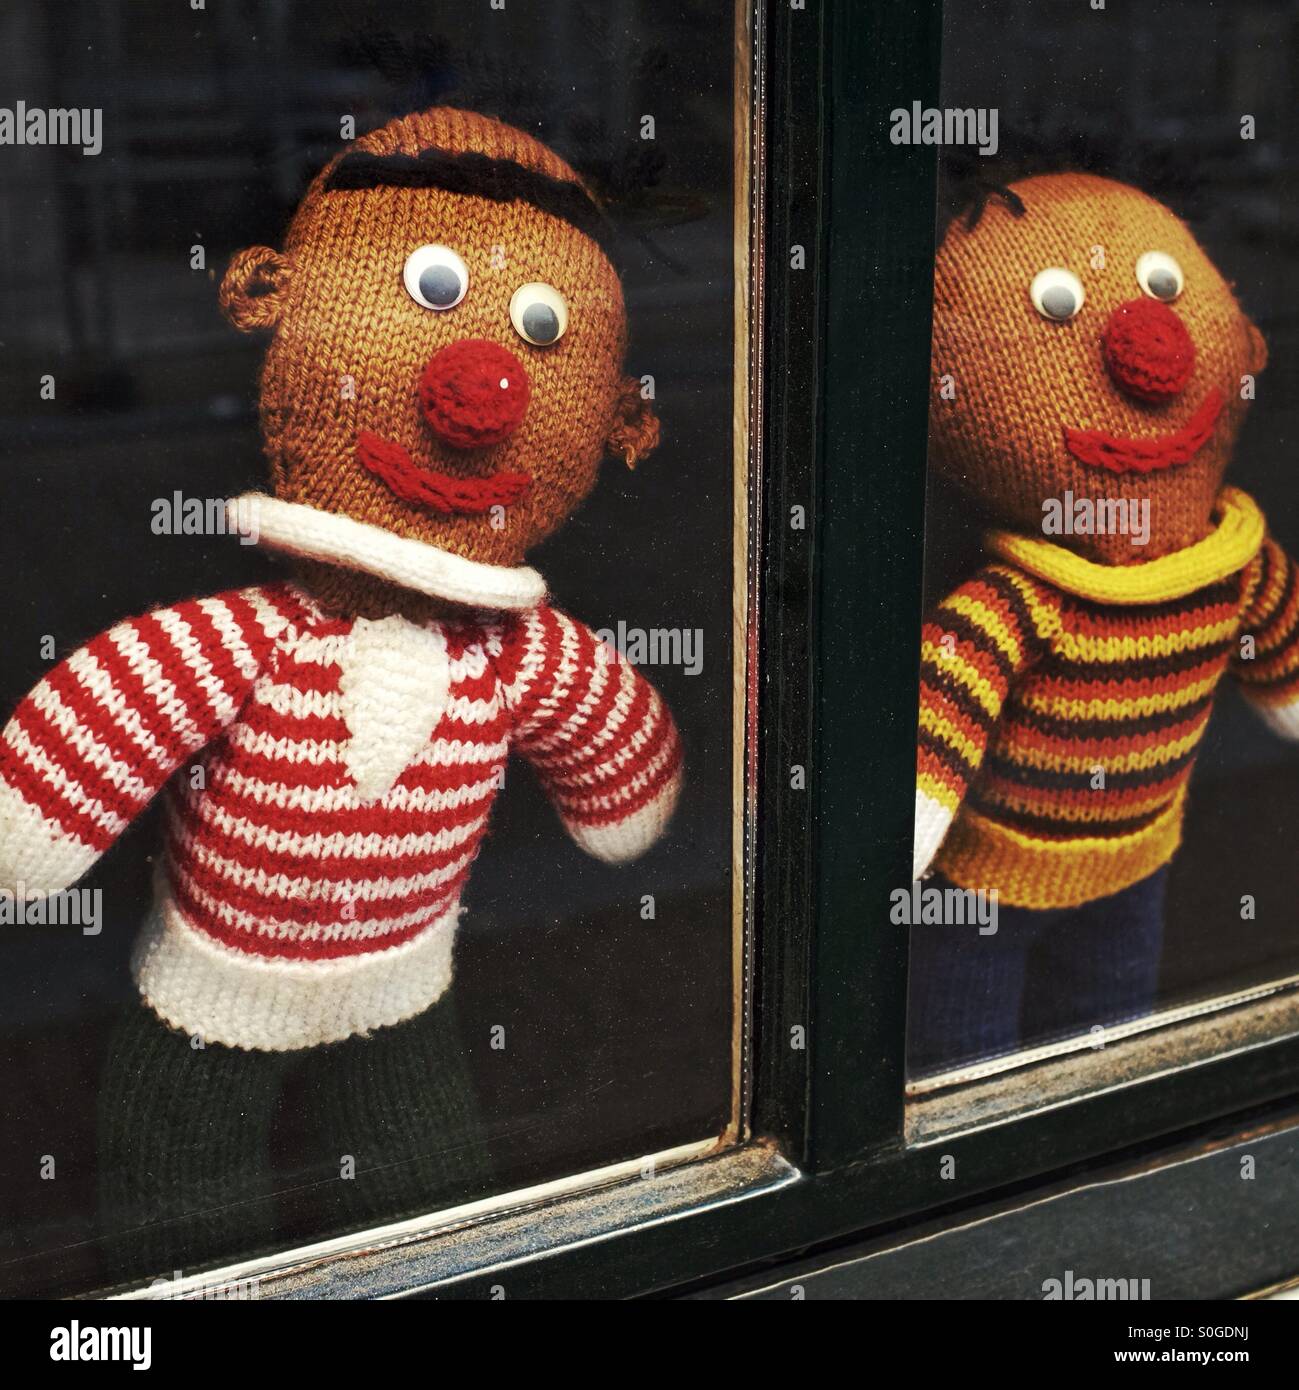 Neighbourhood watch - two knitted characters look out from a window Stock Photo